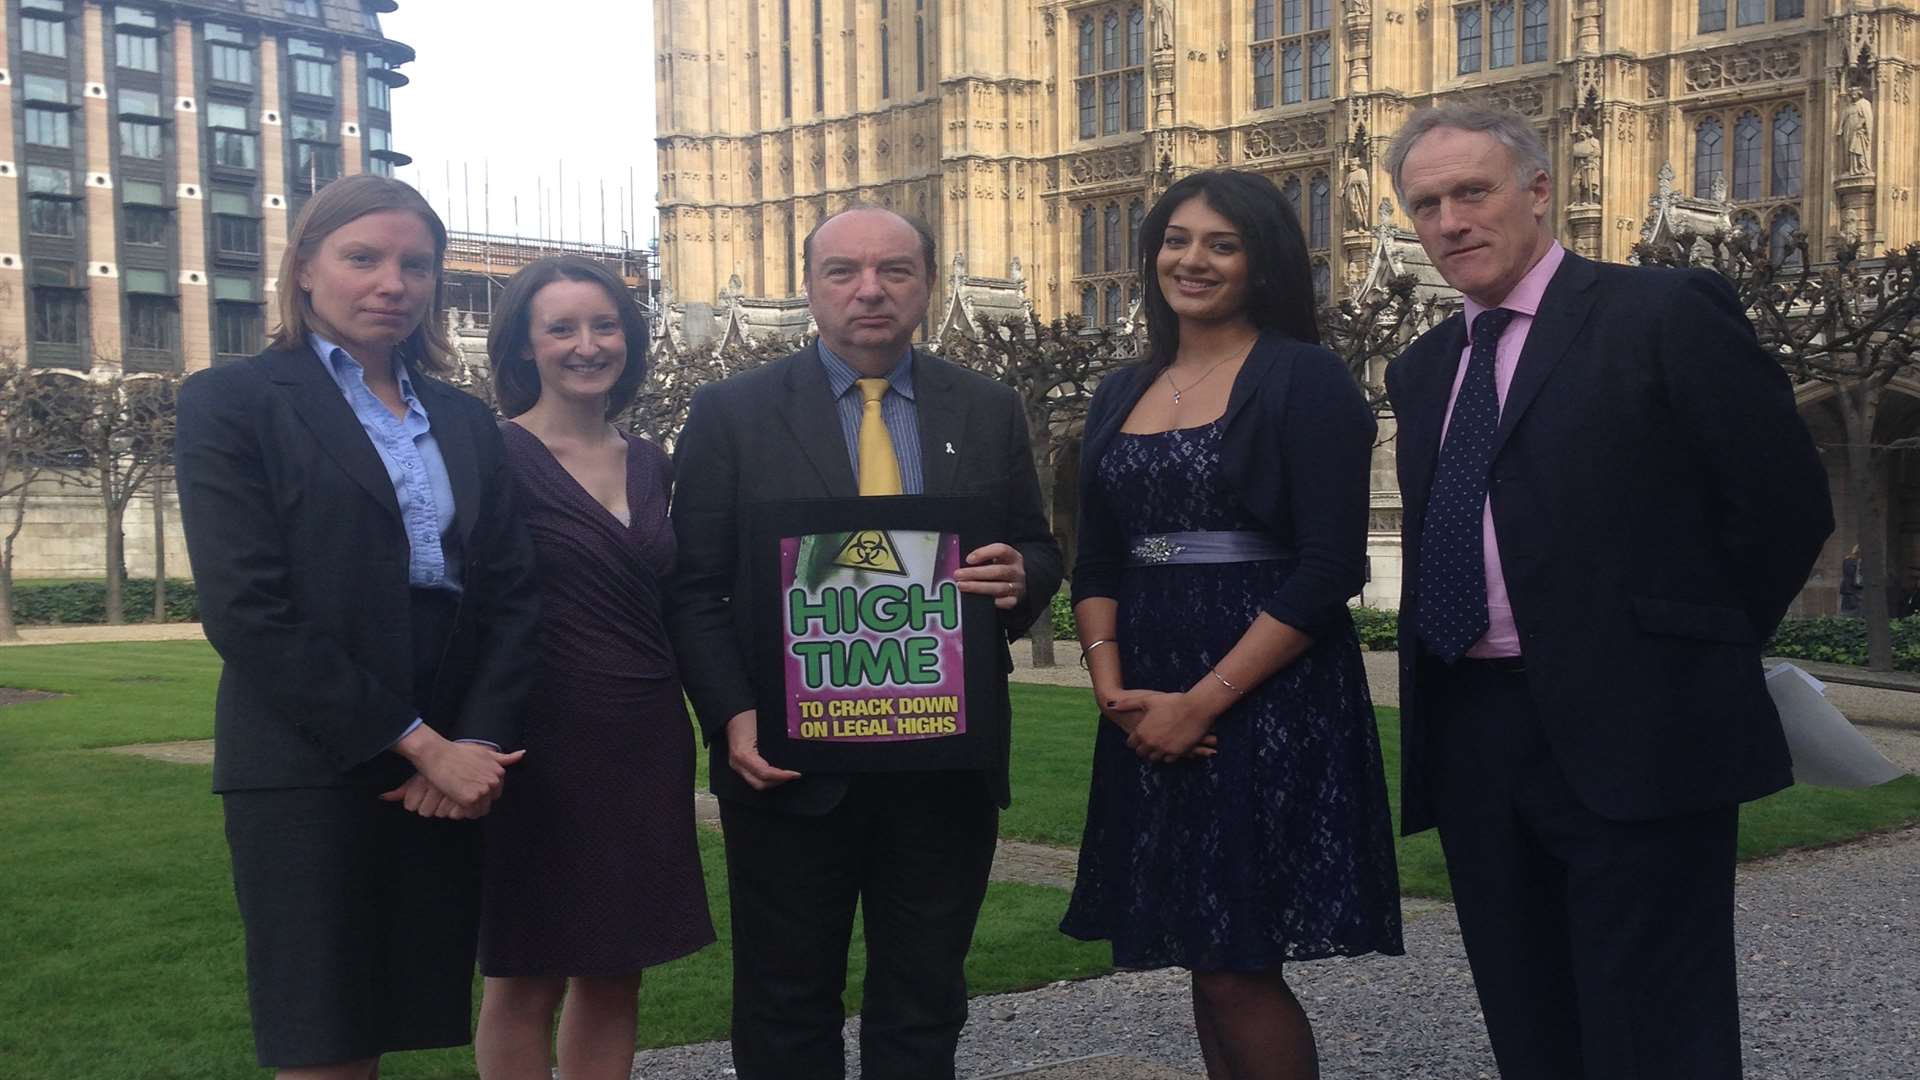 Minister Norman Baker accepts the legal highs dossier from Kiran Kaur and Nicola Everett, together with MPs Julian Brazier and Tracey Crouch